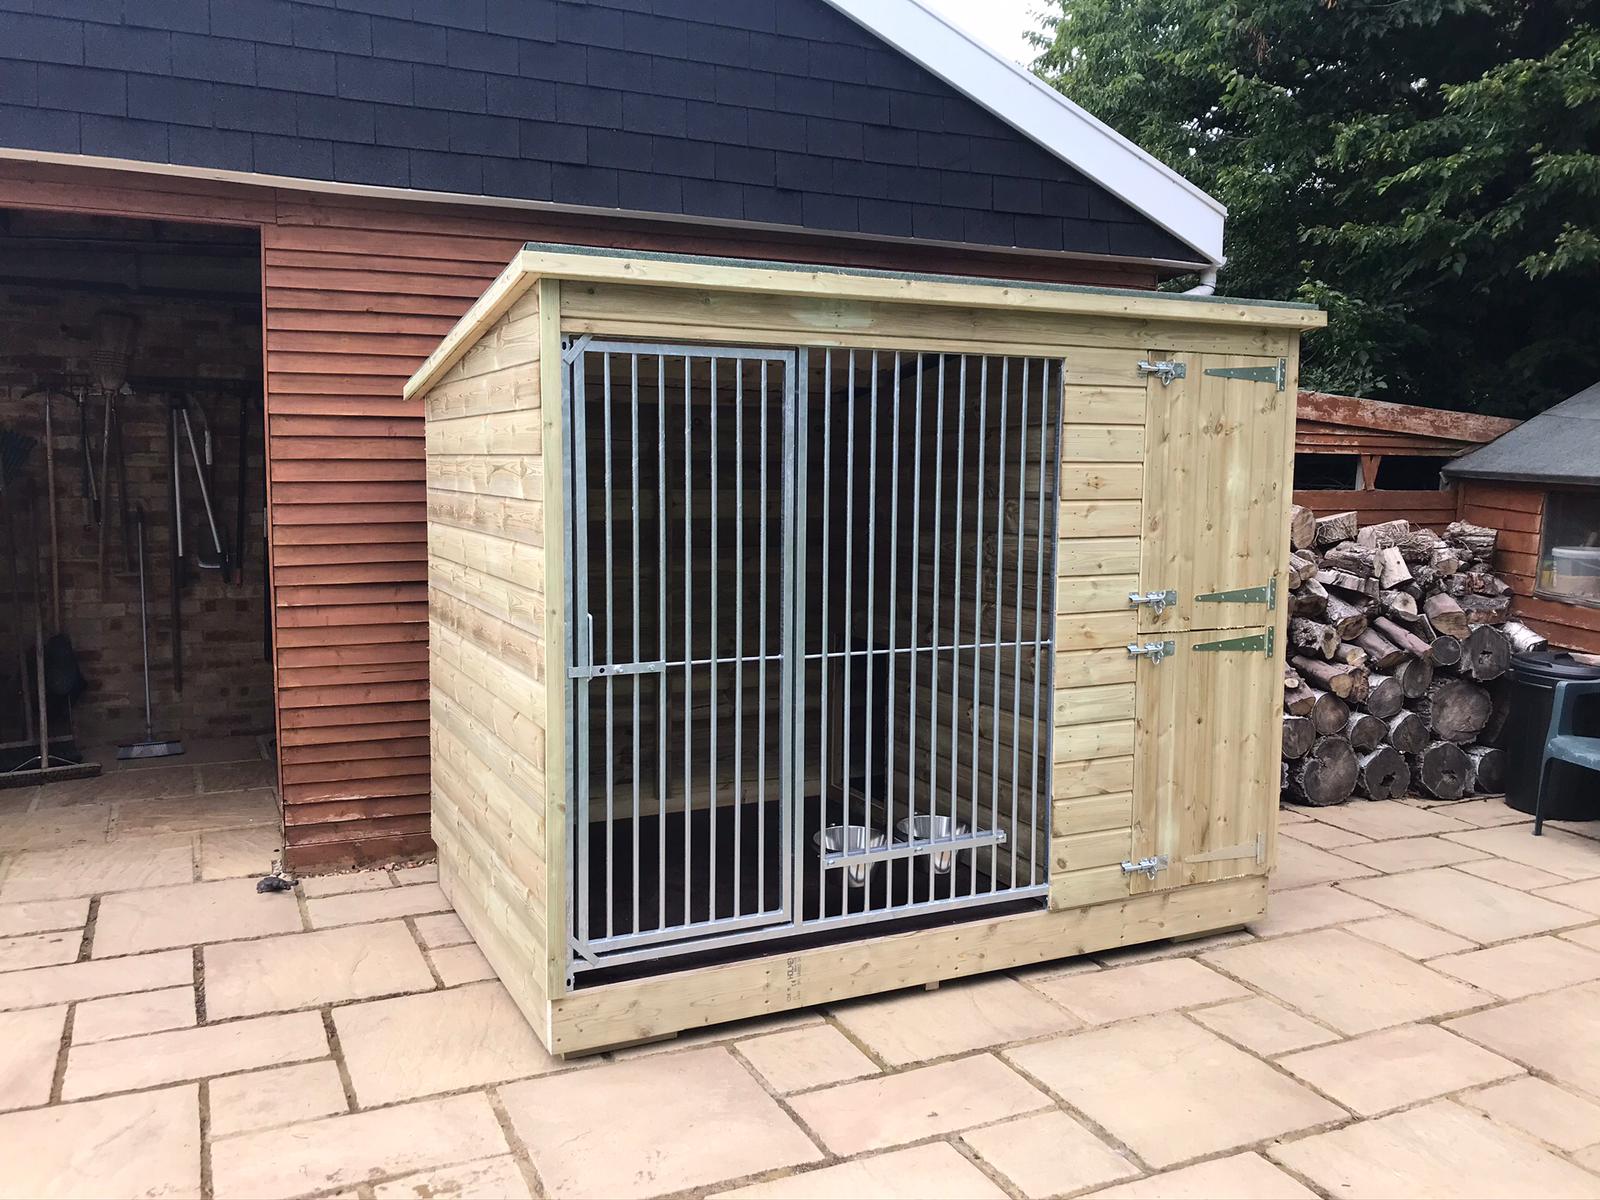 Chesterfield Wooden Dog Kennel And Run 14ft (wide) x 6ft (depth) x 5'11ft (high)